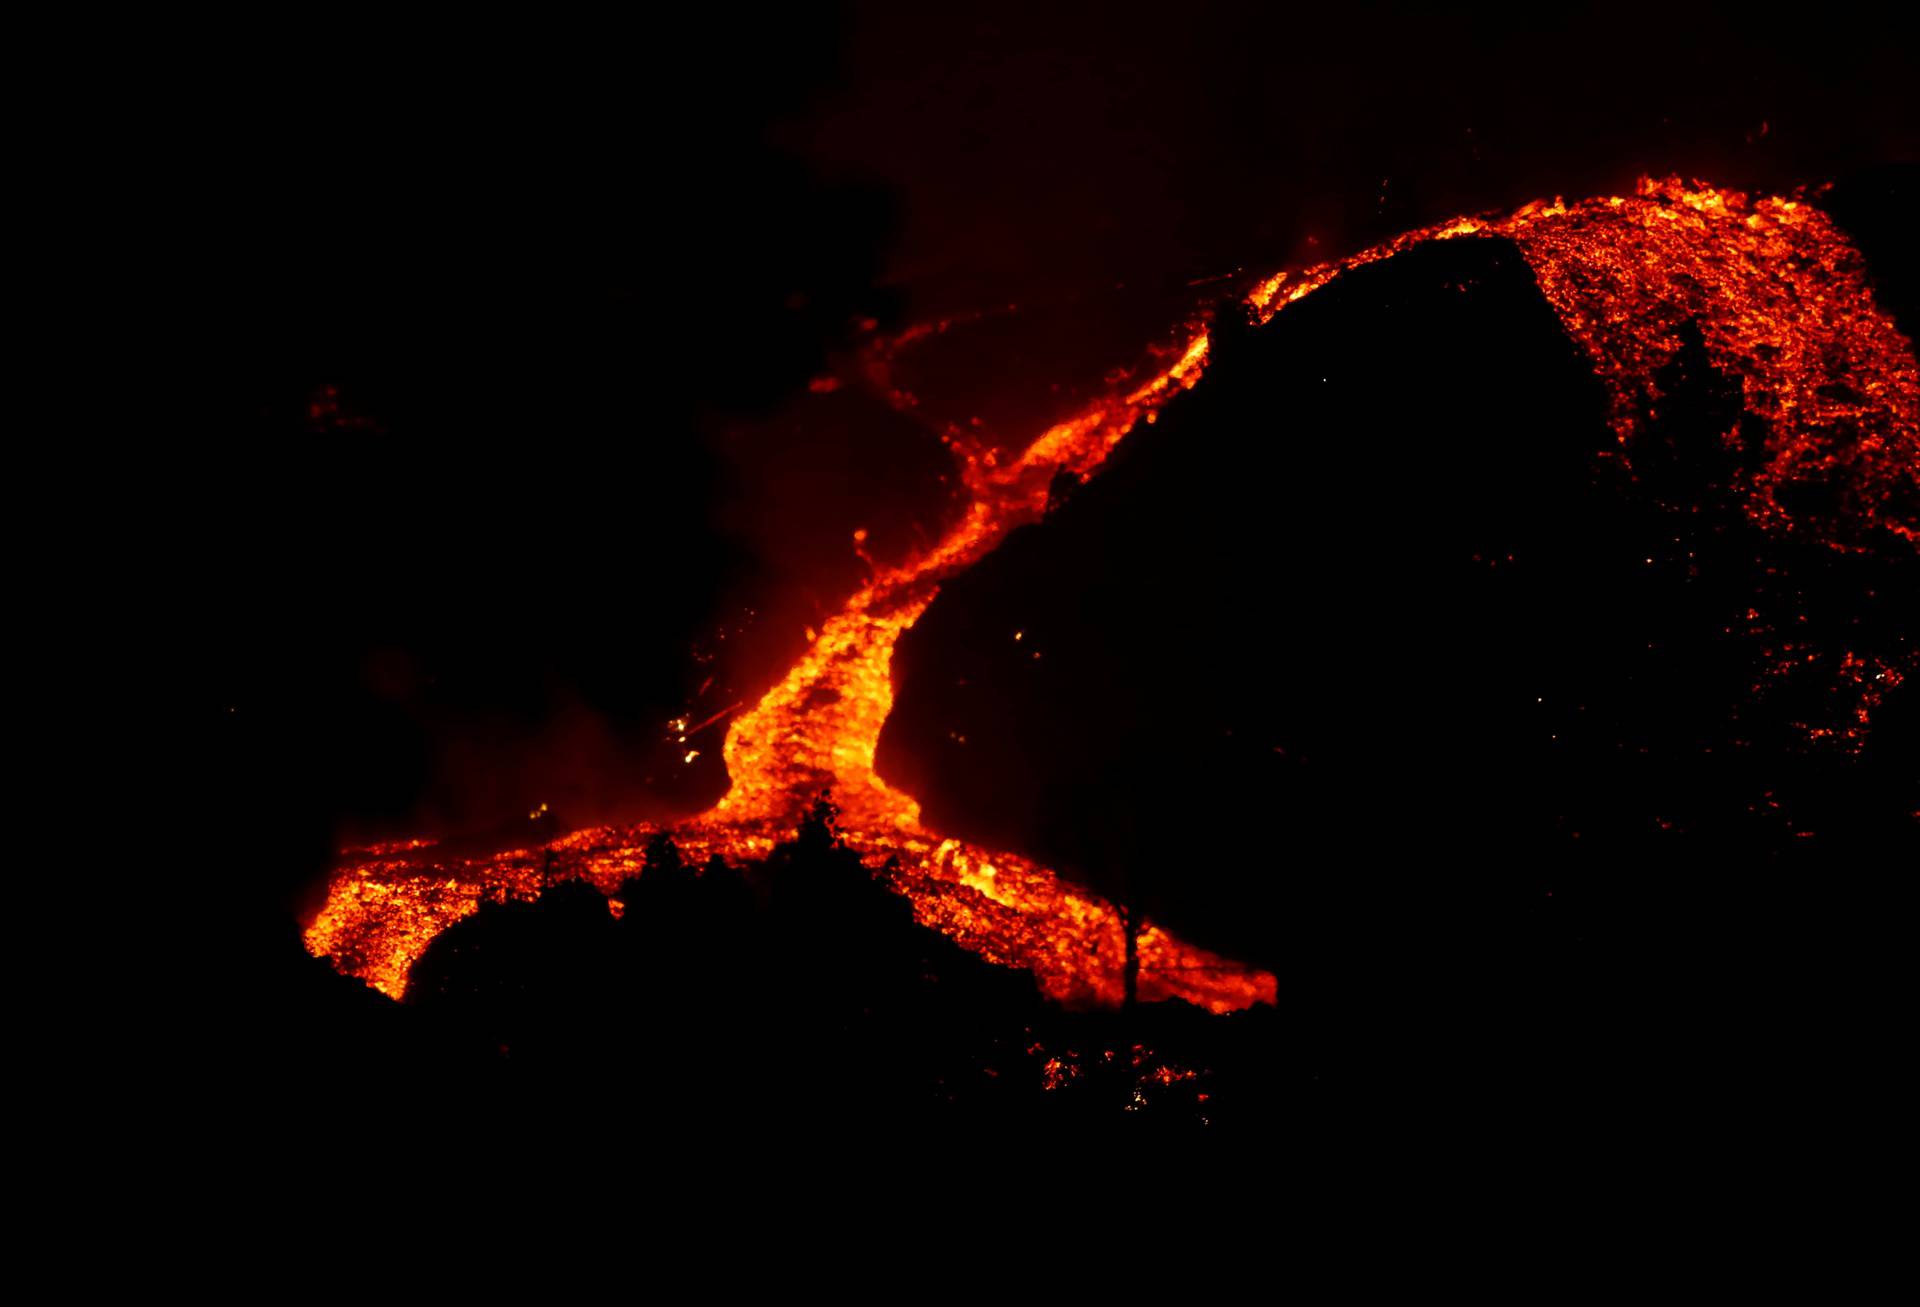 Lava flows downhill following the eruption of a volcano in Spain